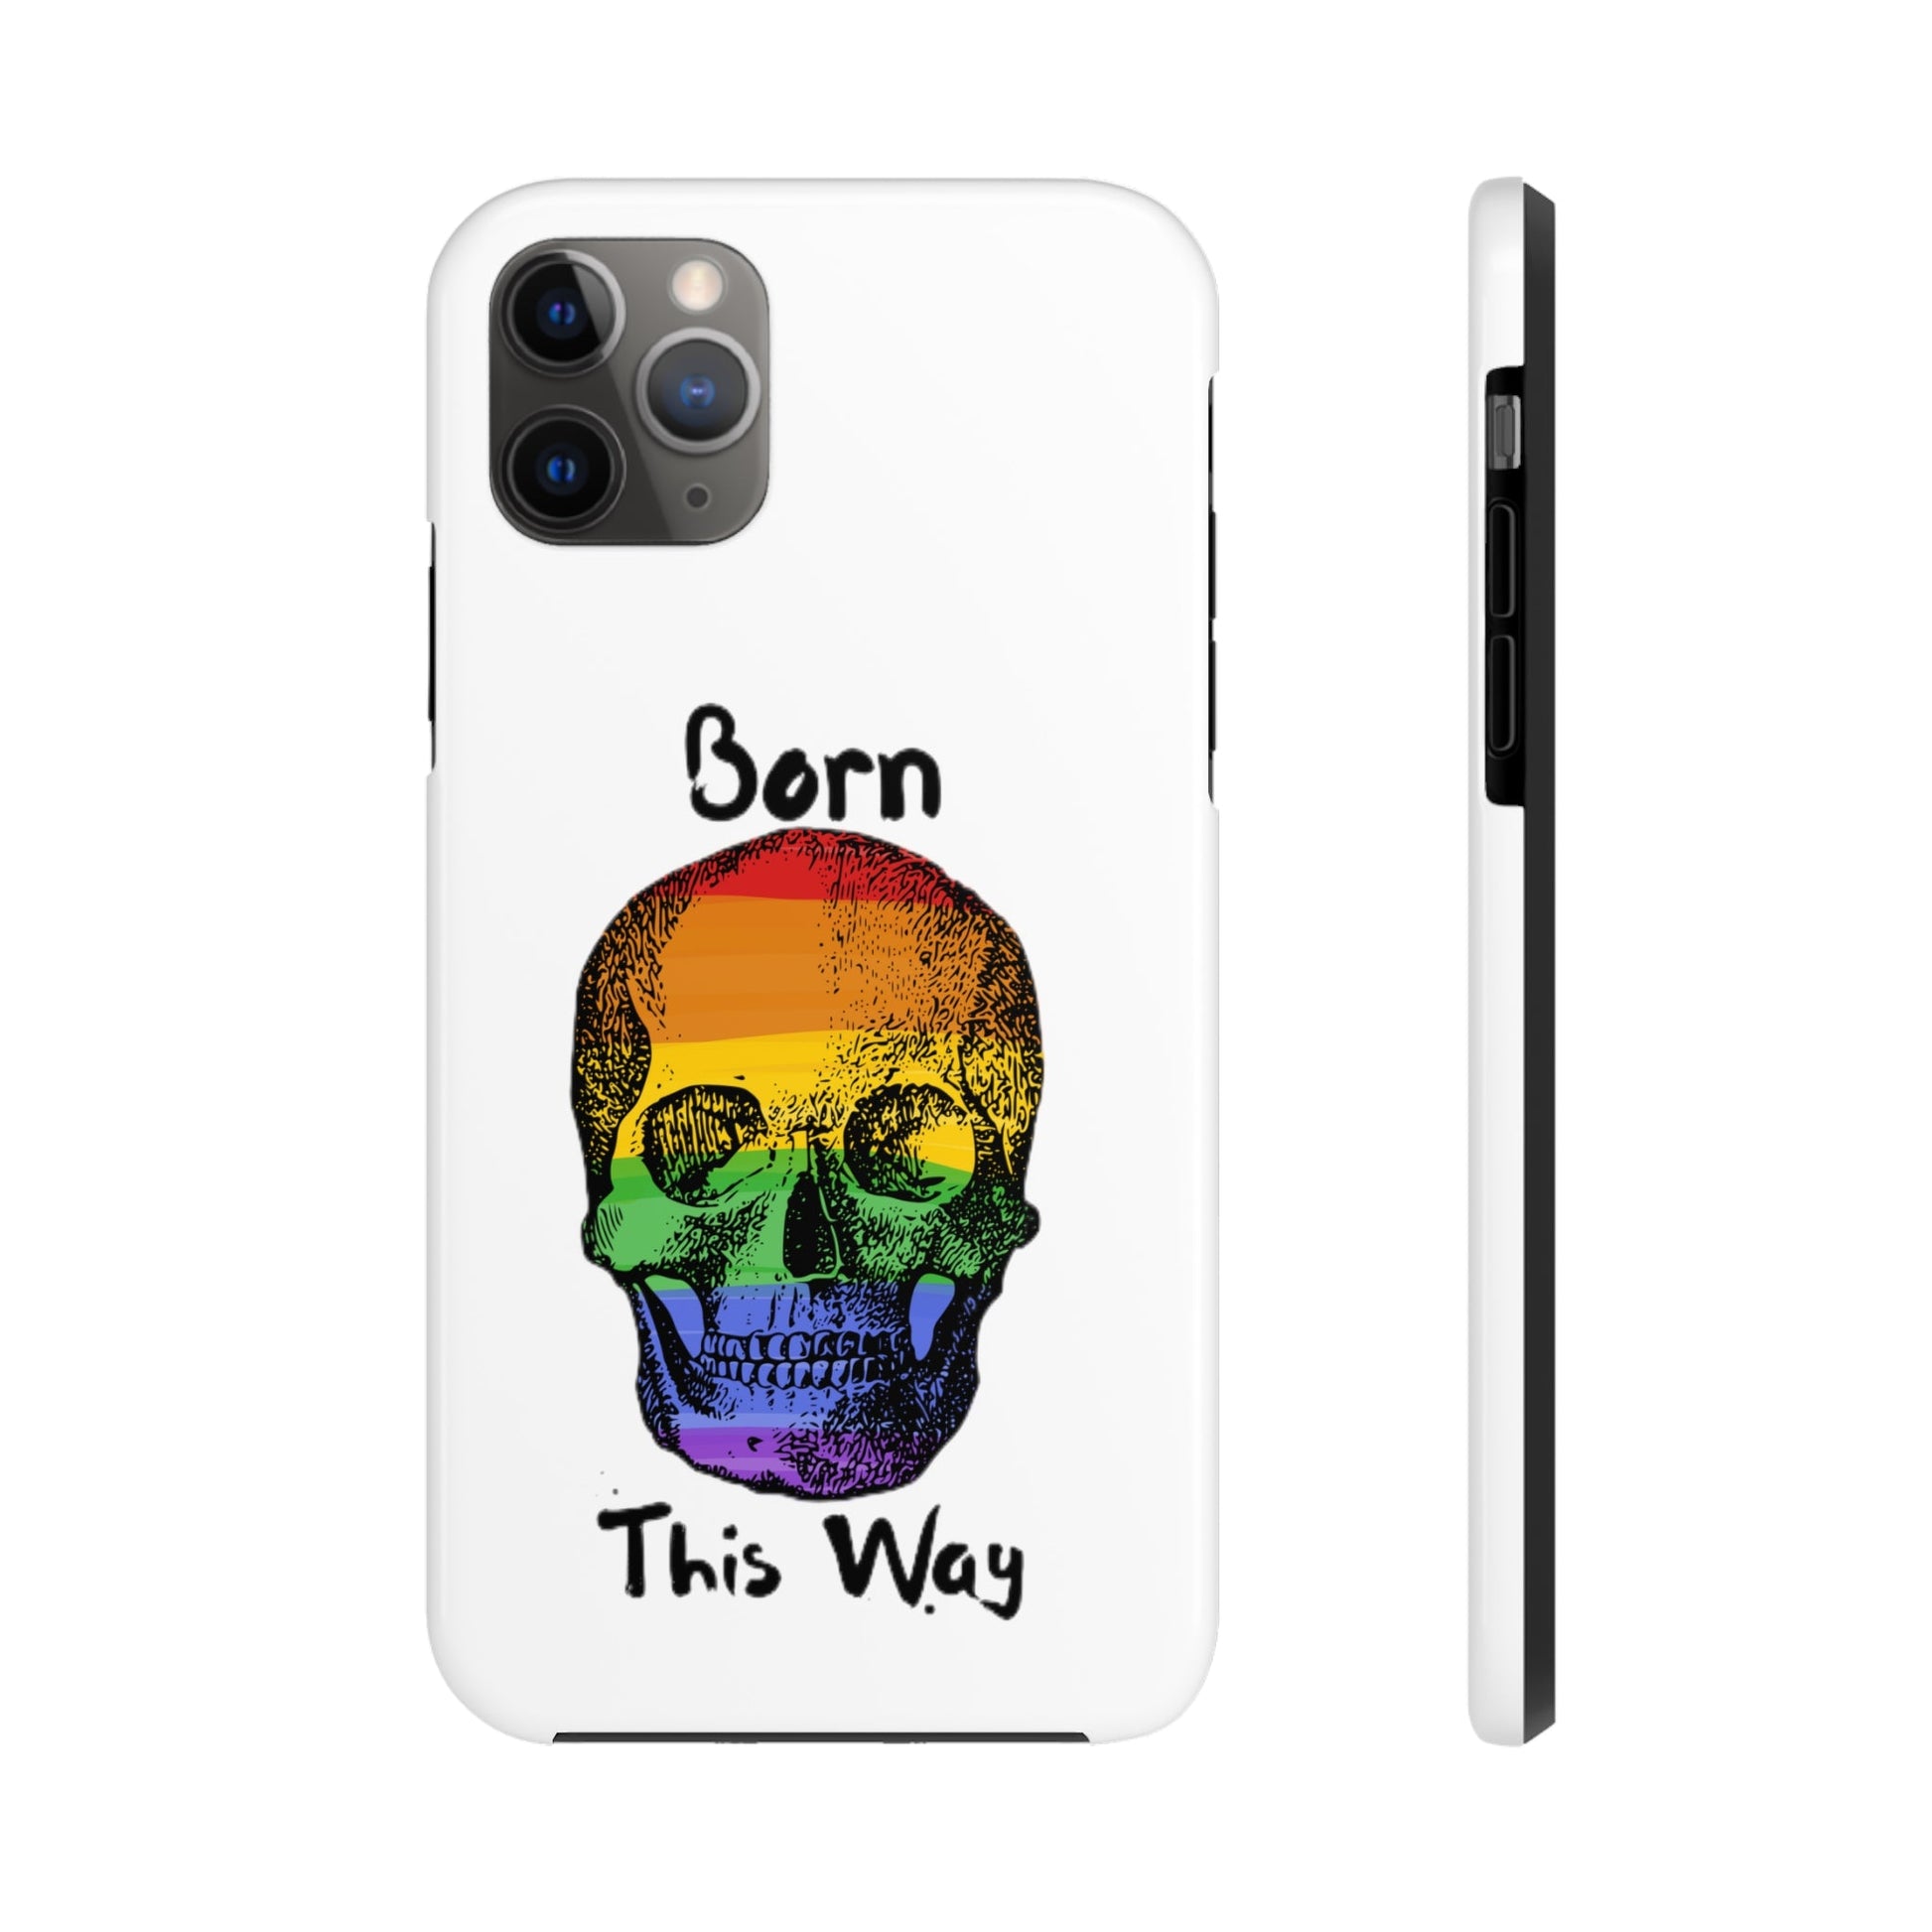 Born This Way Skeleton Pride Tough Phone Cases for iPhone 7, 8, X, 11, 12, 13, 14 and morePhone CaseVTZdesignsiPhone XSAccessoriesGlossyiPhone Cases